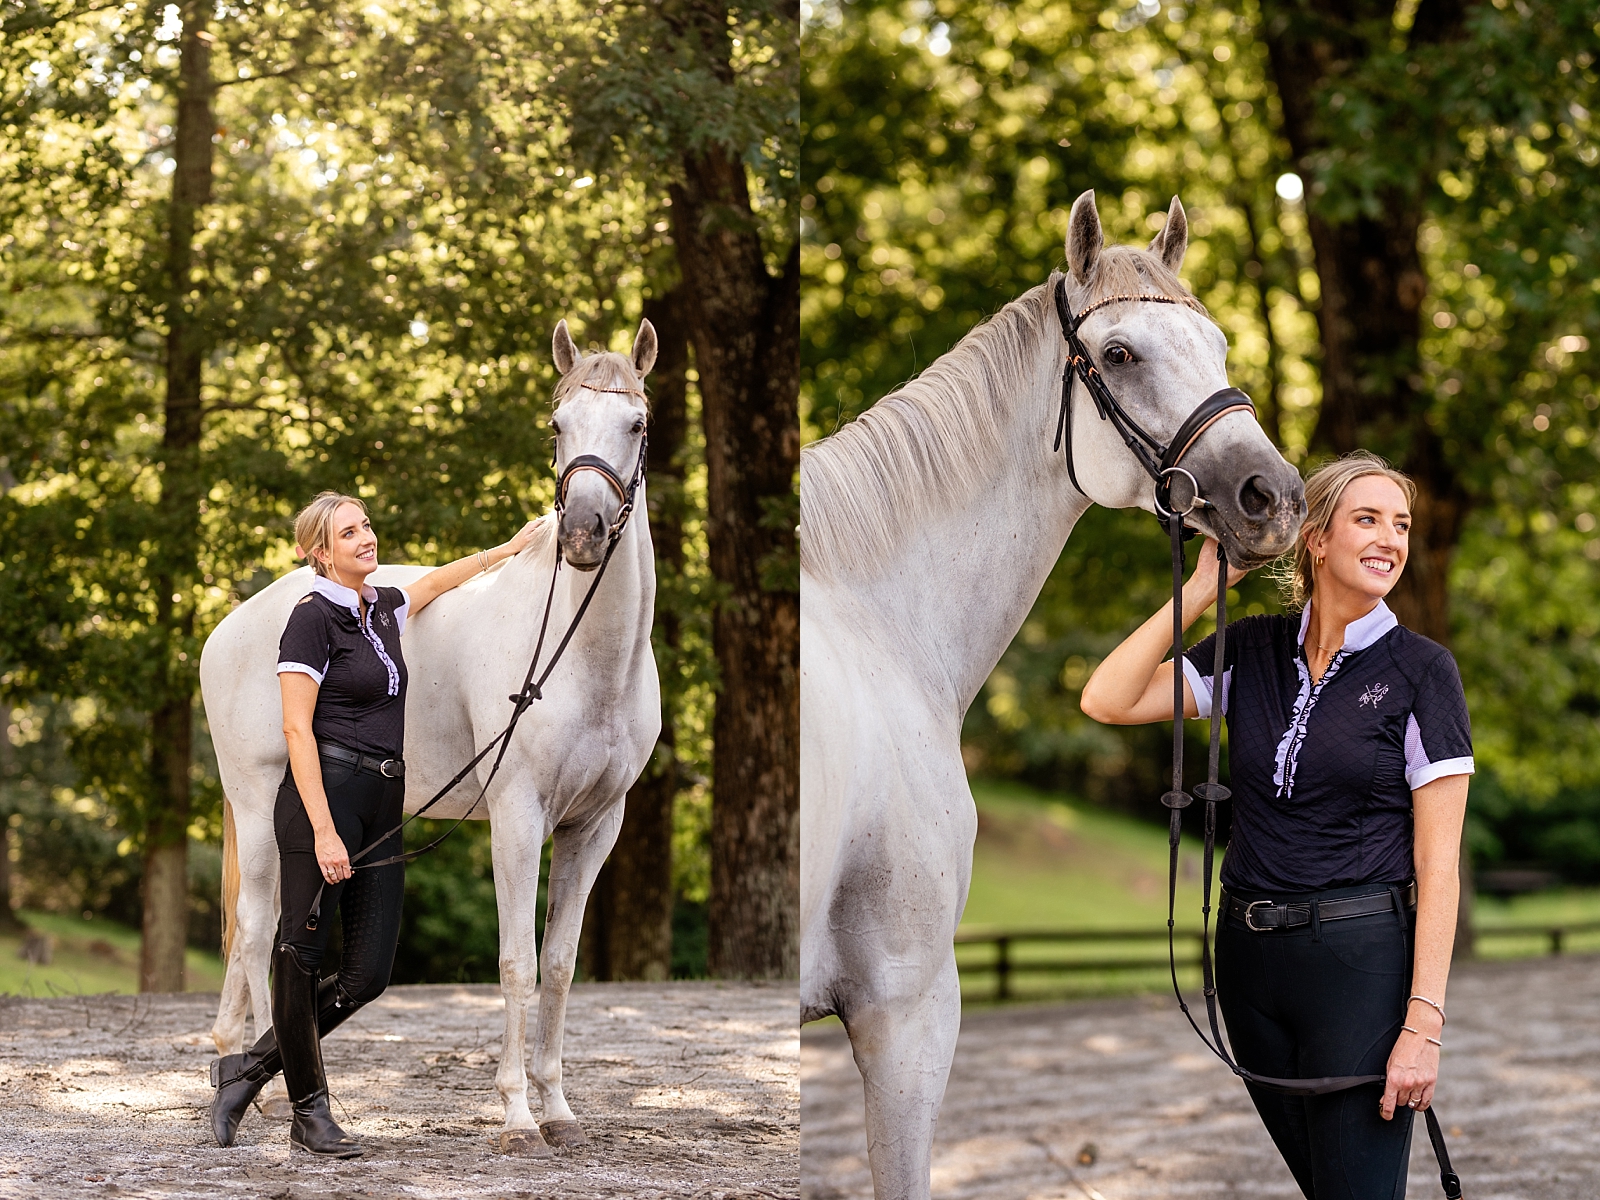 Dressage rider takes photos with her horse in Atlanta, Georgia. Outfit ideas for horse and rider photoshoot. Atlanta equine photographer.